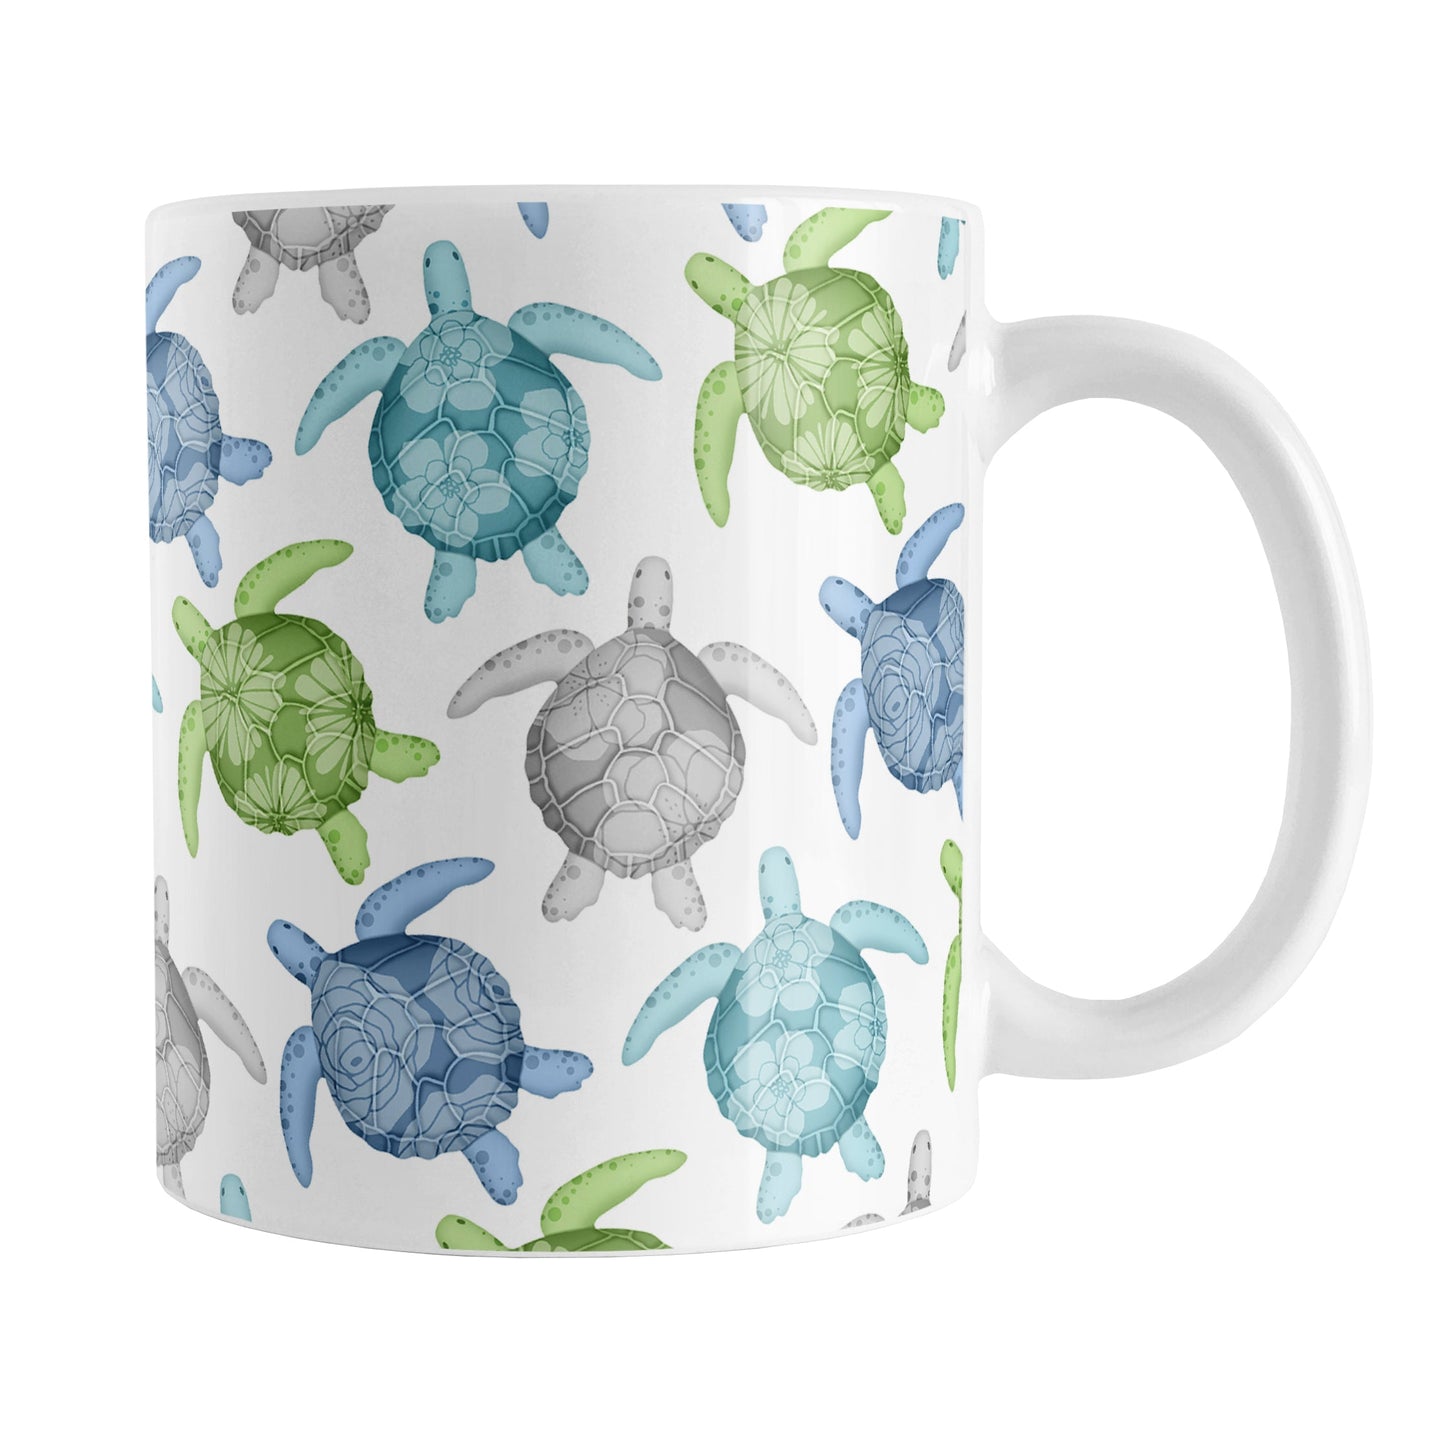 Cool Sea Turtles Pattern Mug (11oz) at Amy's Coffee Mugs. A ceramic mug with a pattern of sea turtles in a cool color palette of blue, green, turquoise and gray that wraps around the mug to the handle. Each cool colored sea turtle has a different floral watermark over its shell.